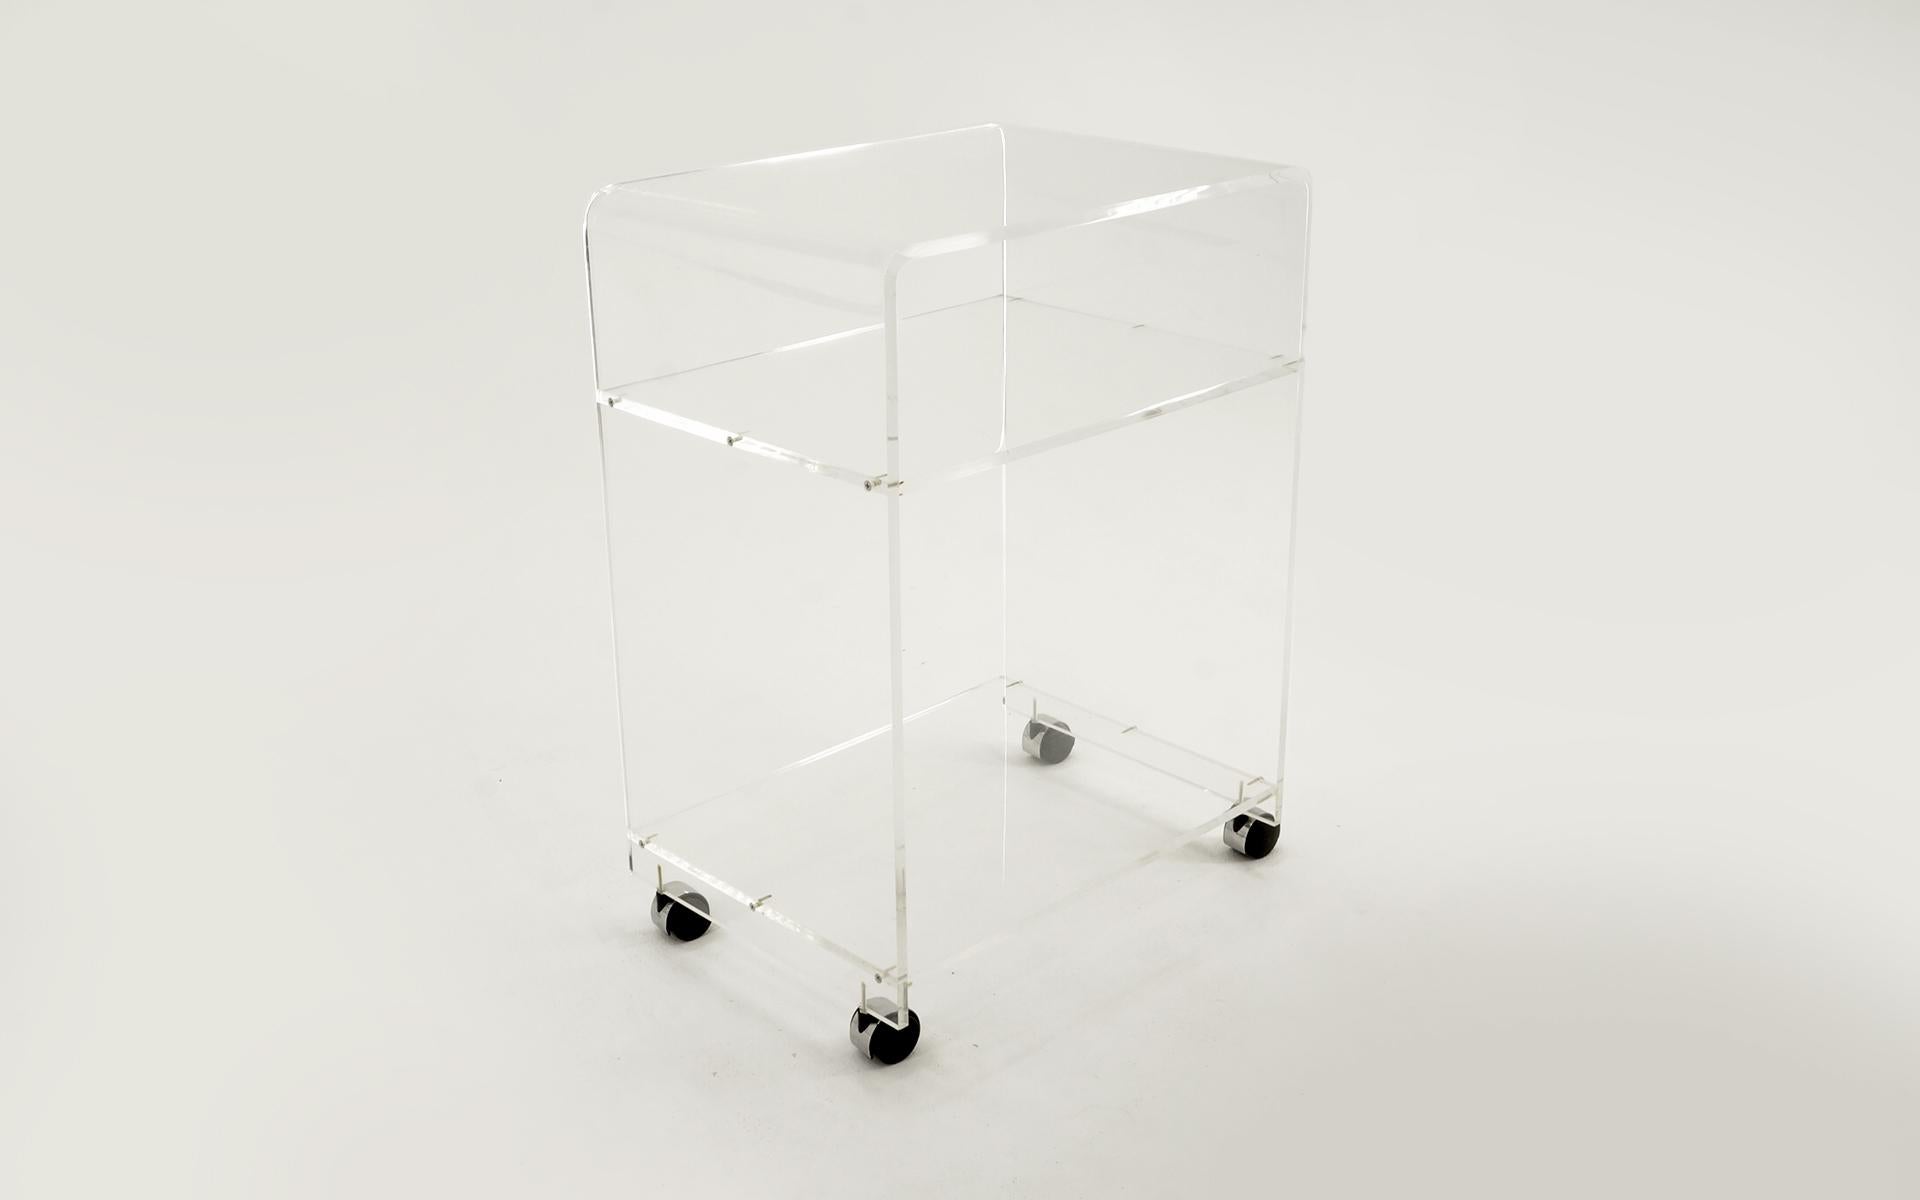 Acrylic / Lucite bar or serving cart. Rolls easily and is high quality construction with thick Lucite. Light scratches to the acrylic.